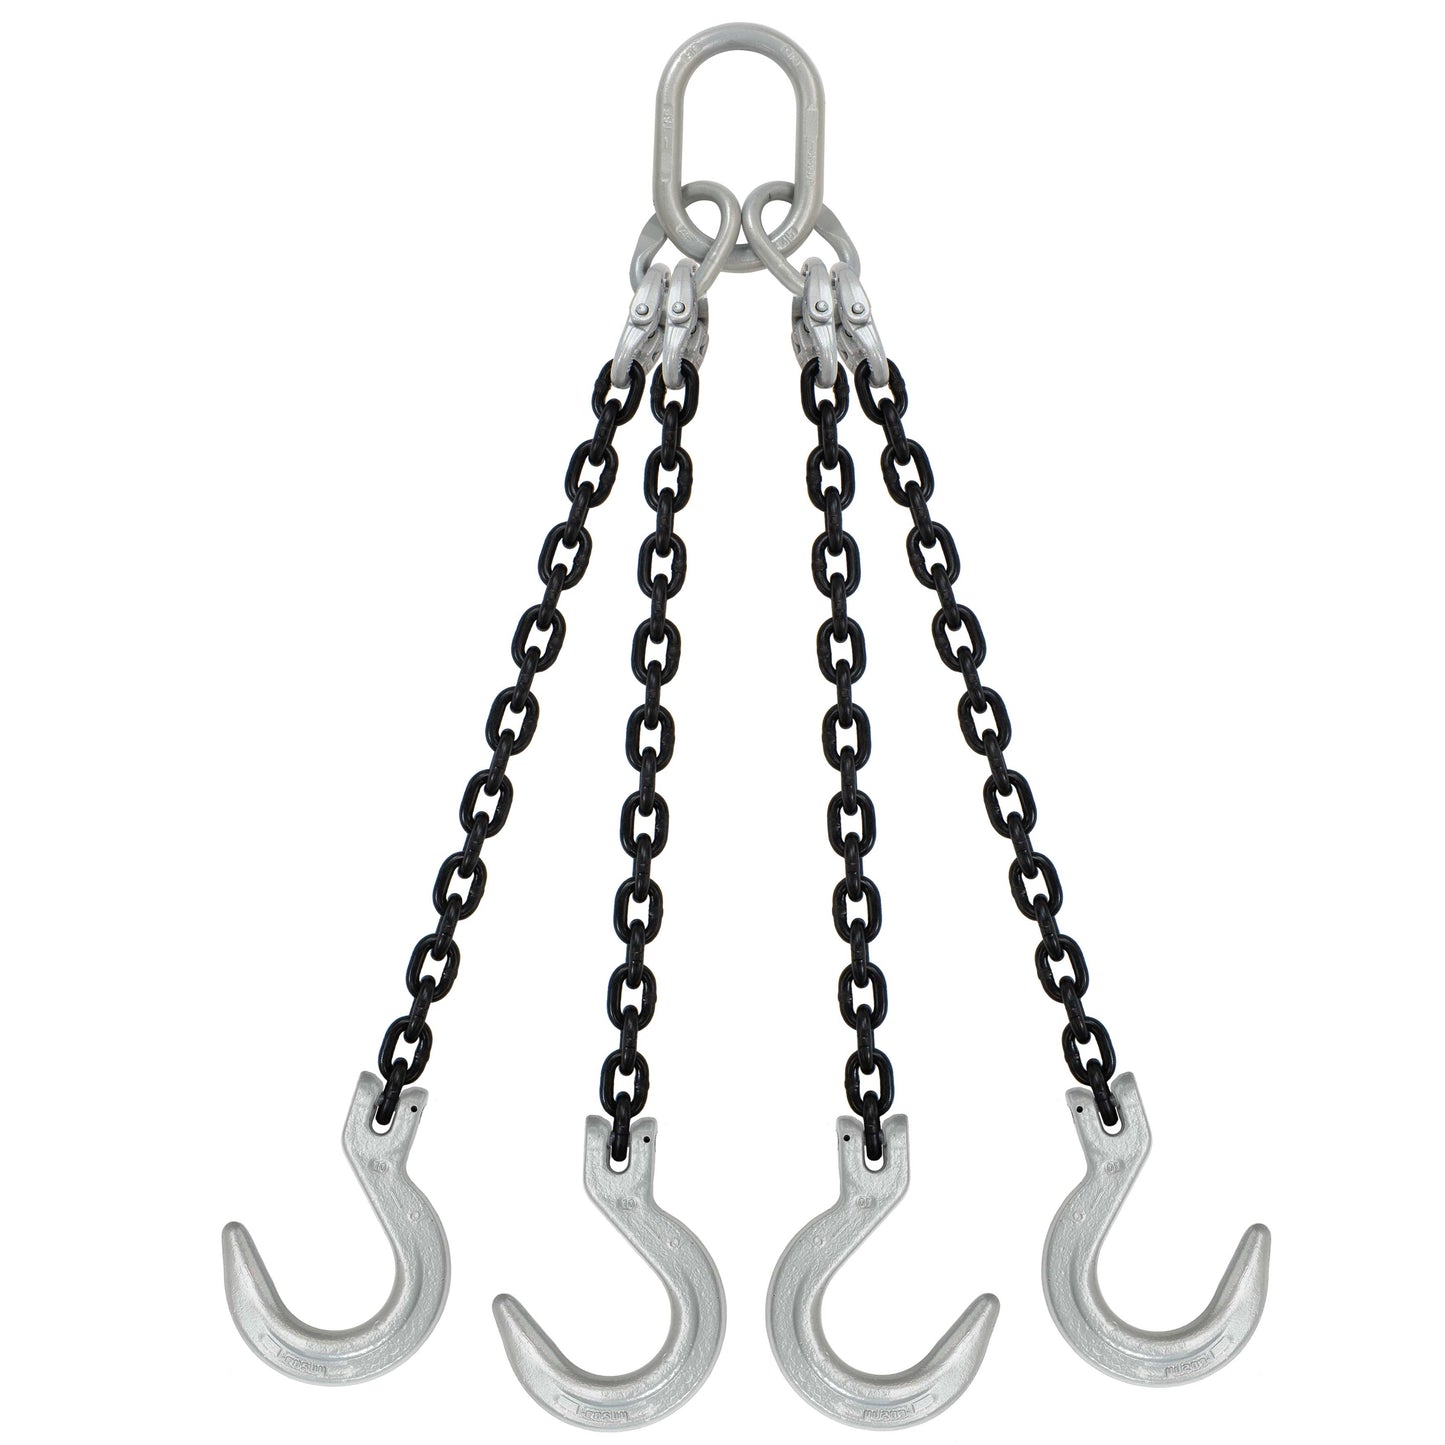 12 inch x 12 foot Domestic 4 Leg Chain Sling w Crosby Foundry Hooks Grade 100 image 1 of 2